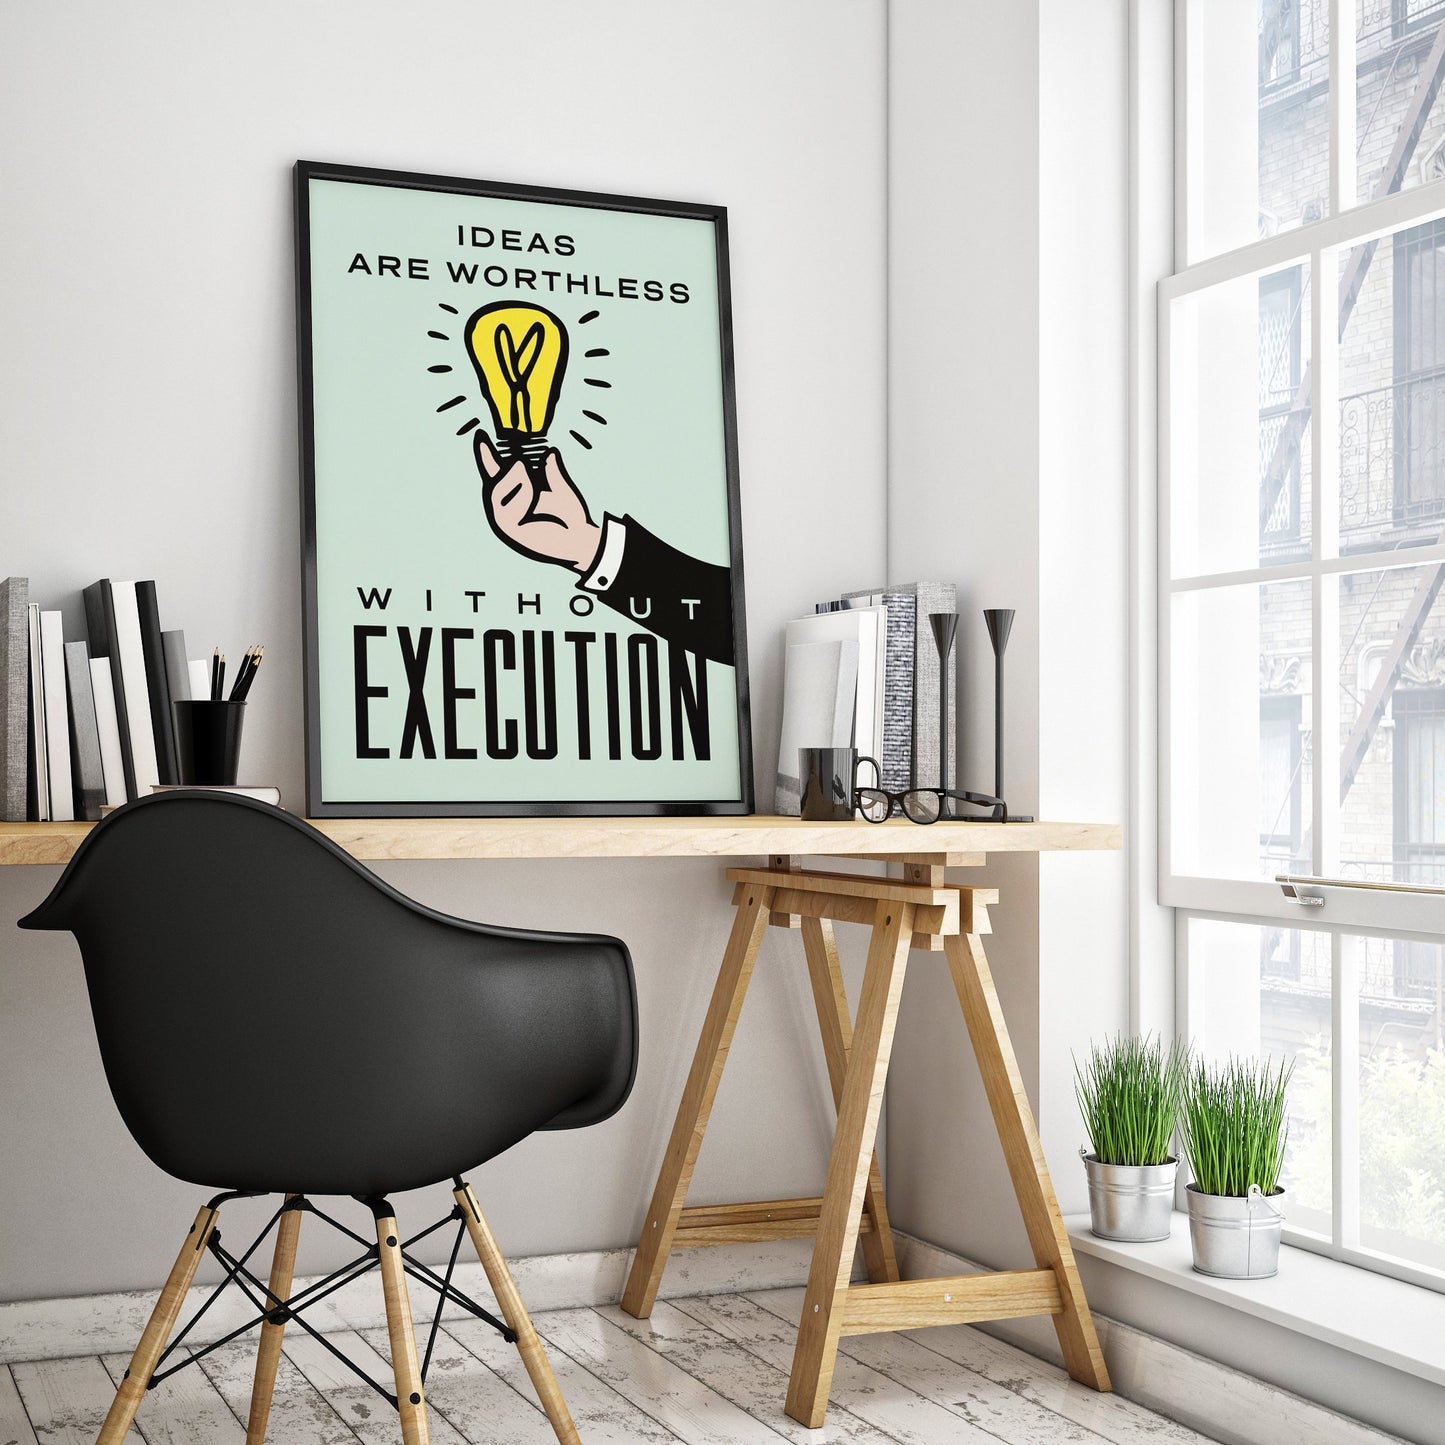 "IDEAS WITHOUT EXECUTION" Motivational Poster